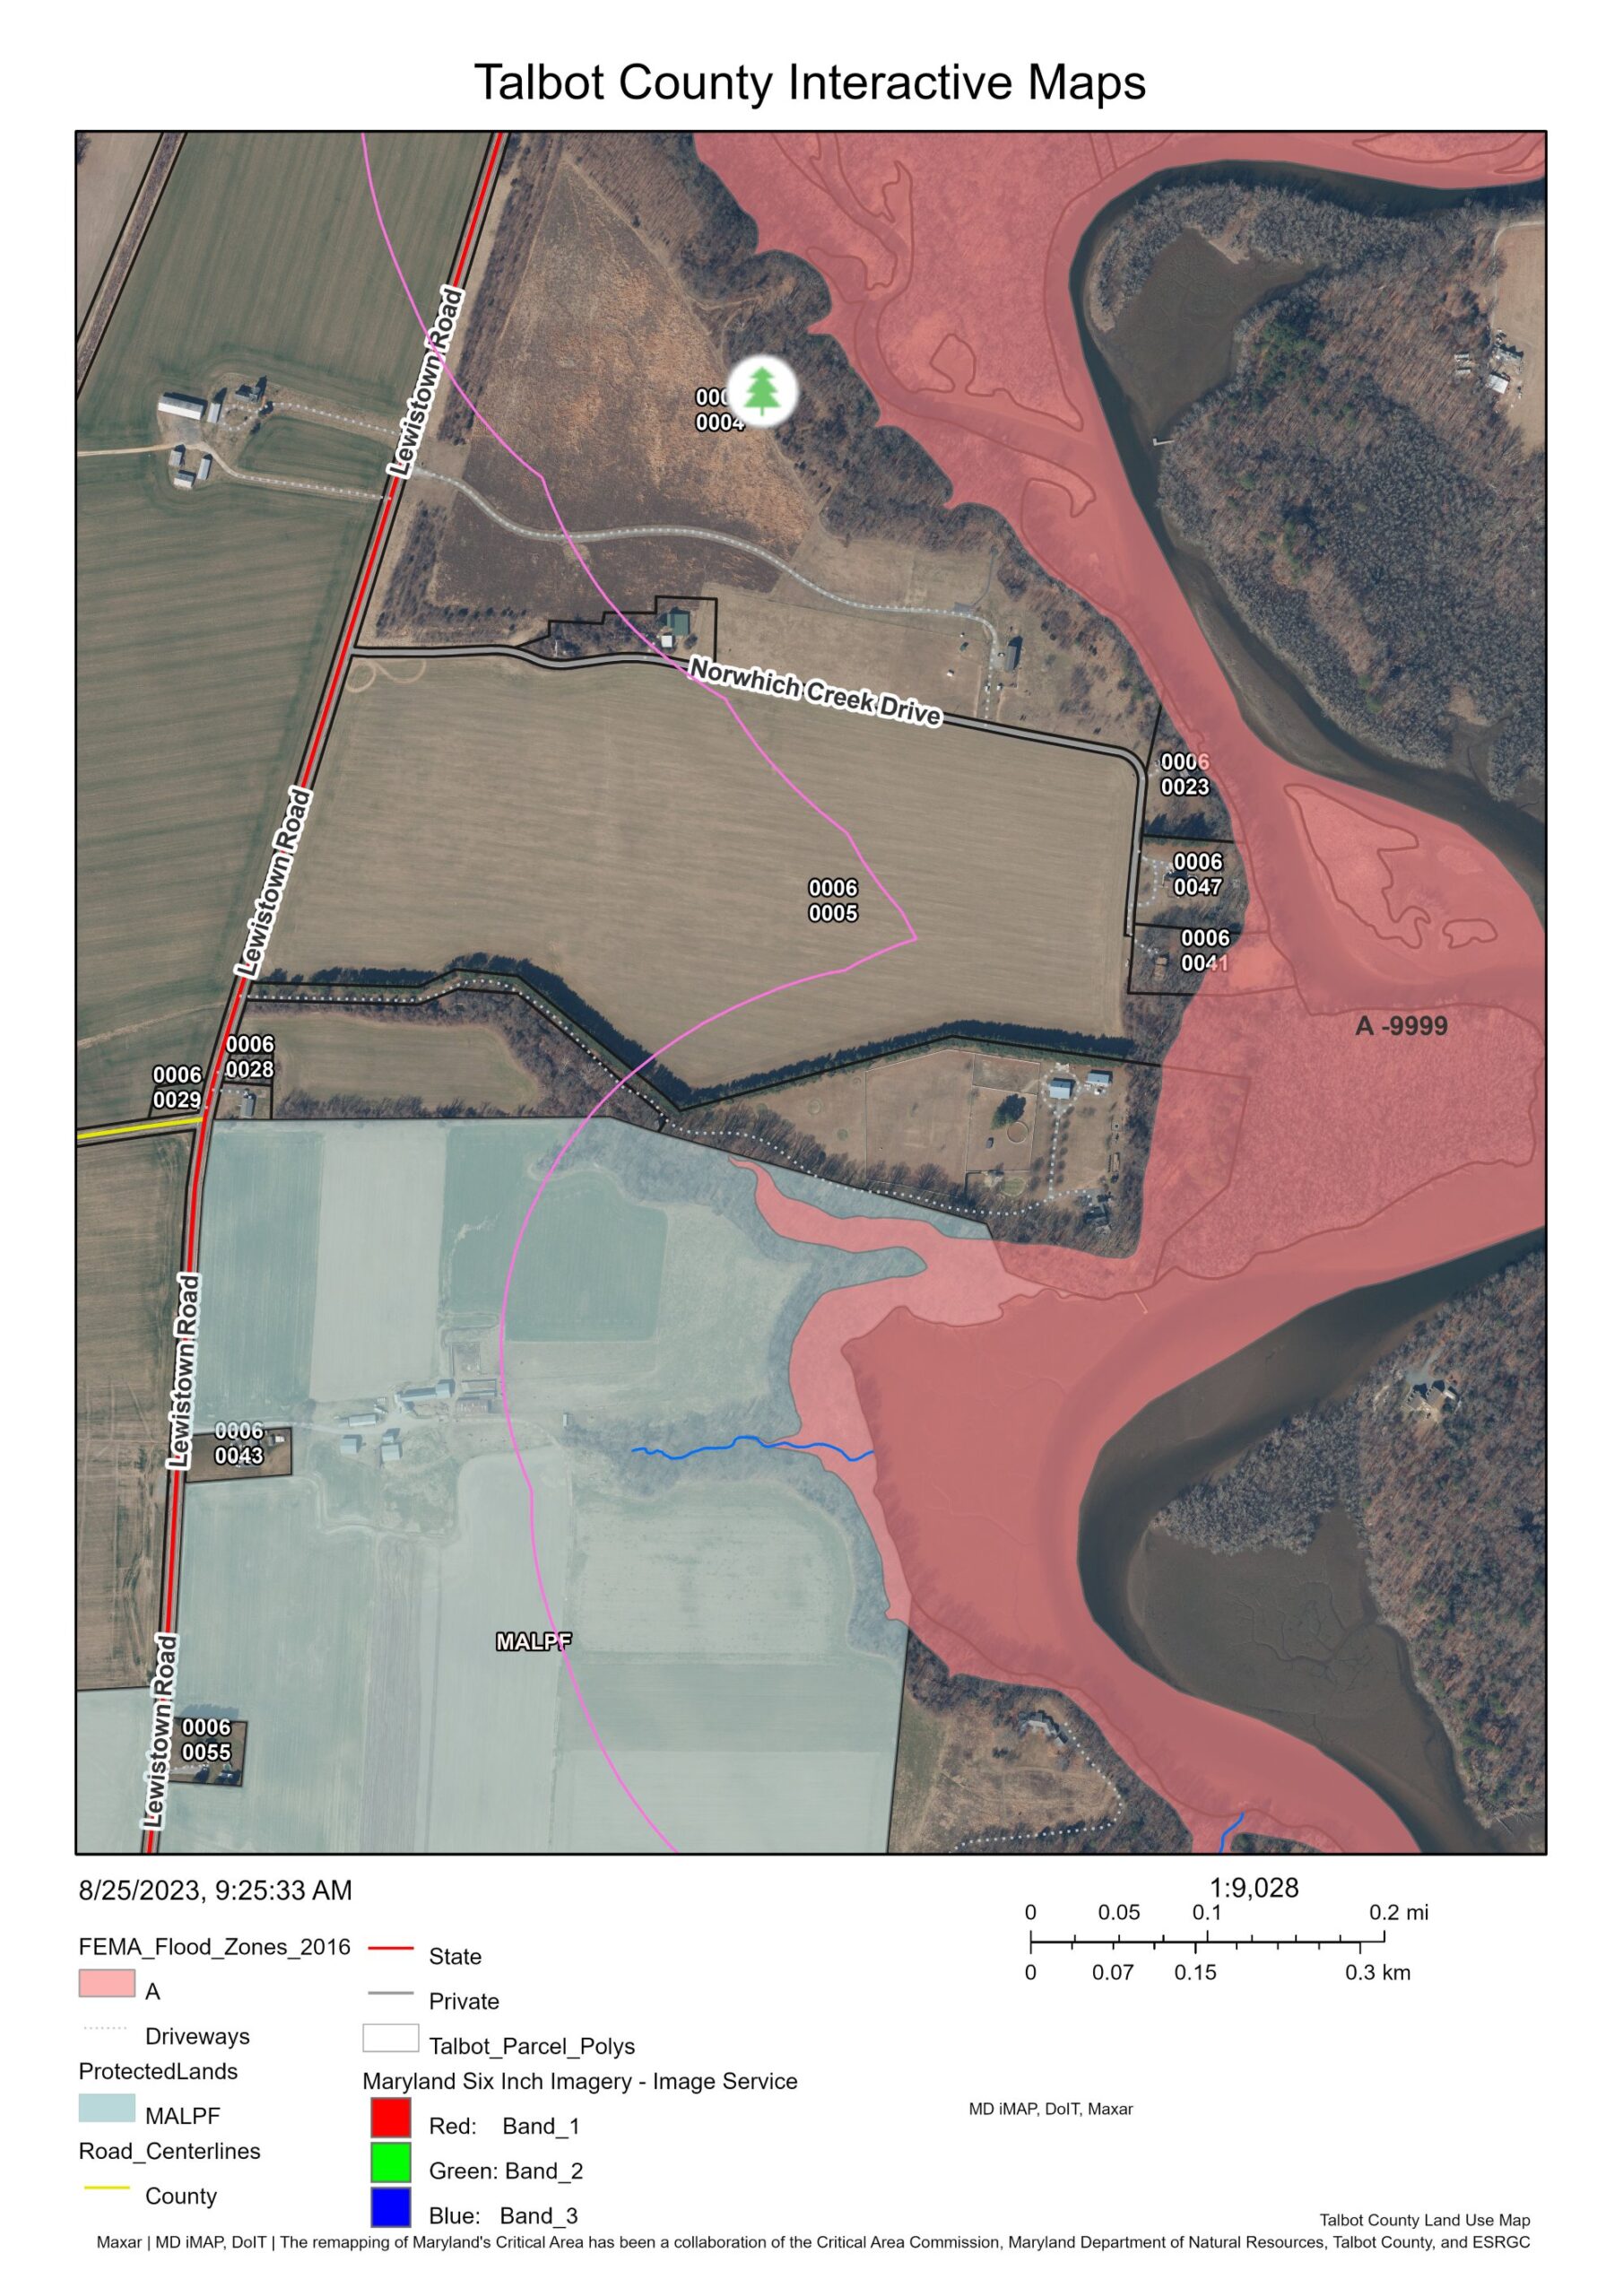 An example of a Talbot County Land Use Interactive Map shows county-owned land below Queen Anne off Lewistown Road. The red-shaded area shows a riverine flood zone and below in the blue-shaded area is a Maryland Agricultural Land Preservation Foundation easement. The maps are maintained by the Talbot County Department of Planning and Zoning and used as an easy way for real estate professionals, mortgage brokers, surveyors, appraisers, engineers, contractors, and other business leaders to search for information related to a specific property or the county at large. The maps can be accessed online at bit.ly/talbotgis.